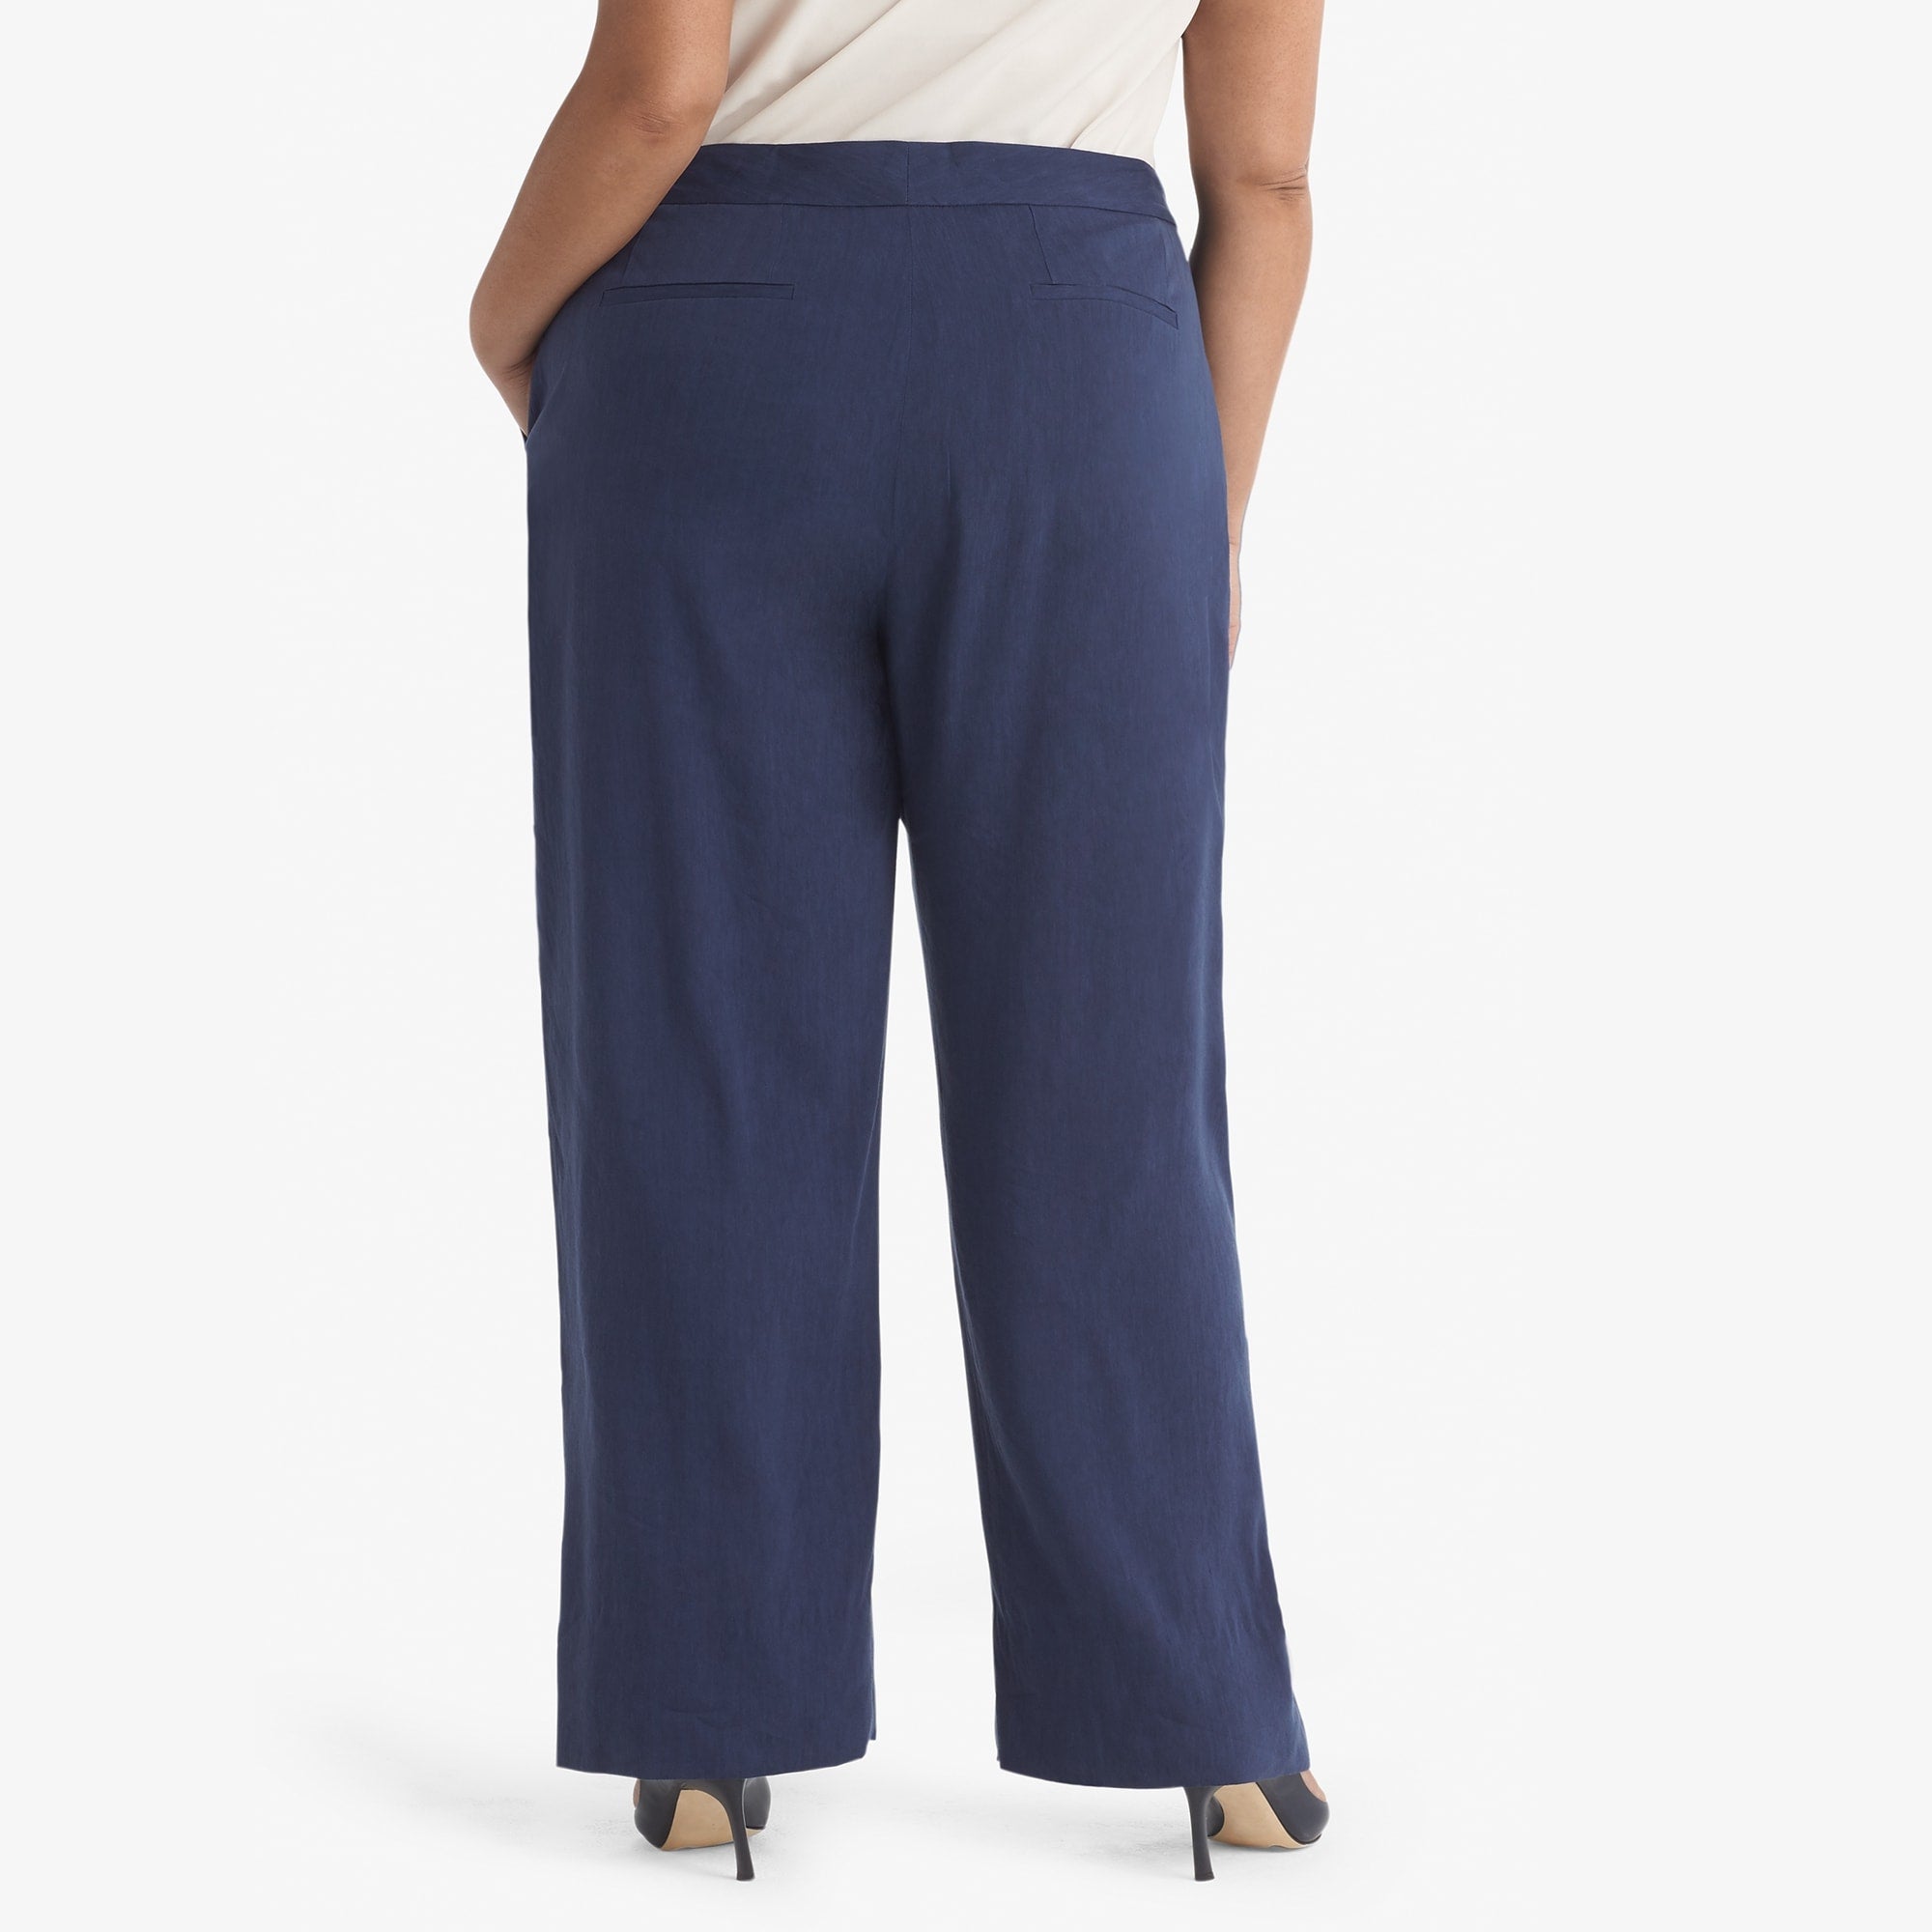 Back image of a woman standing wearing the Tinsley trouser stretch linen in blueberry